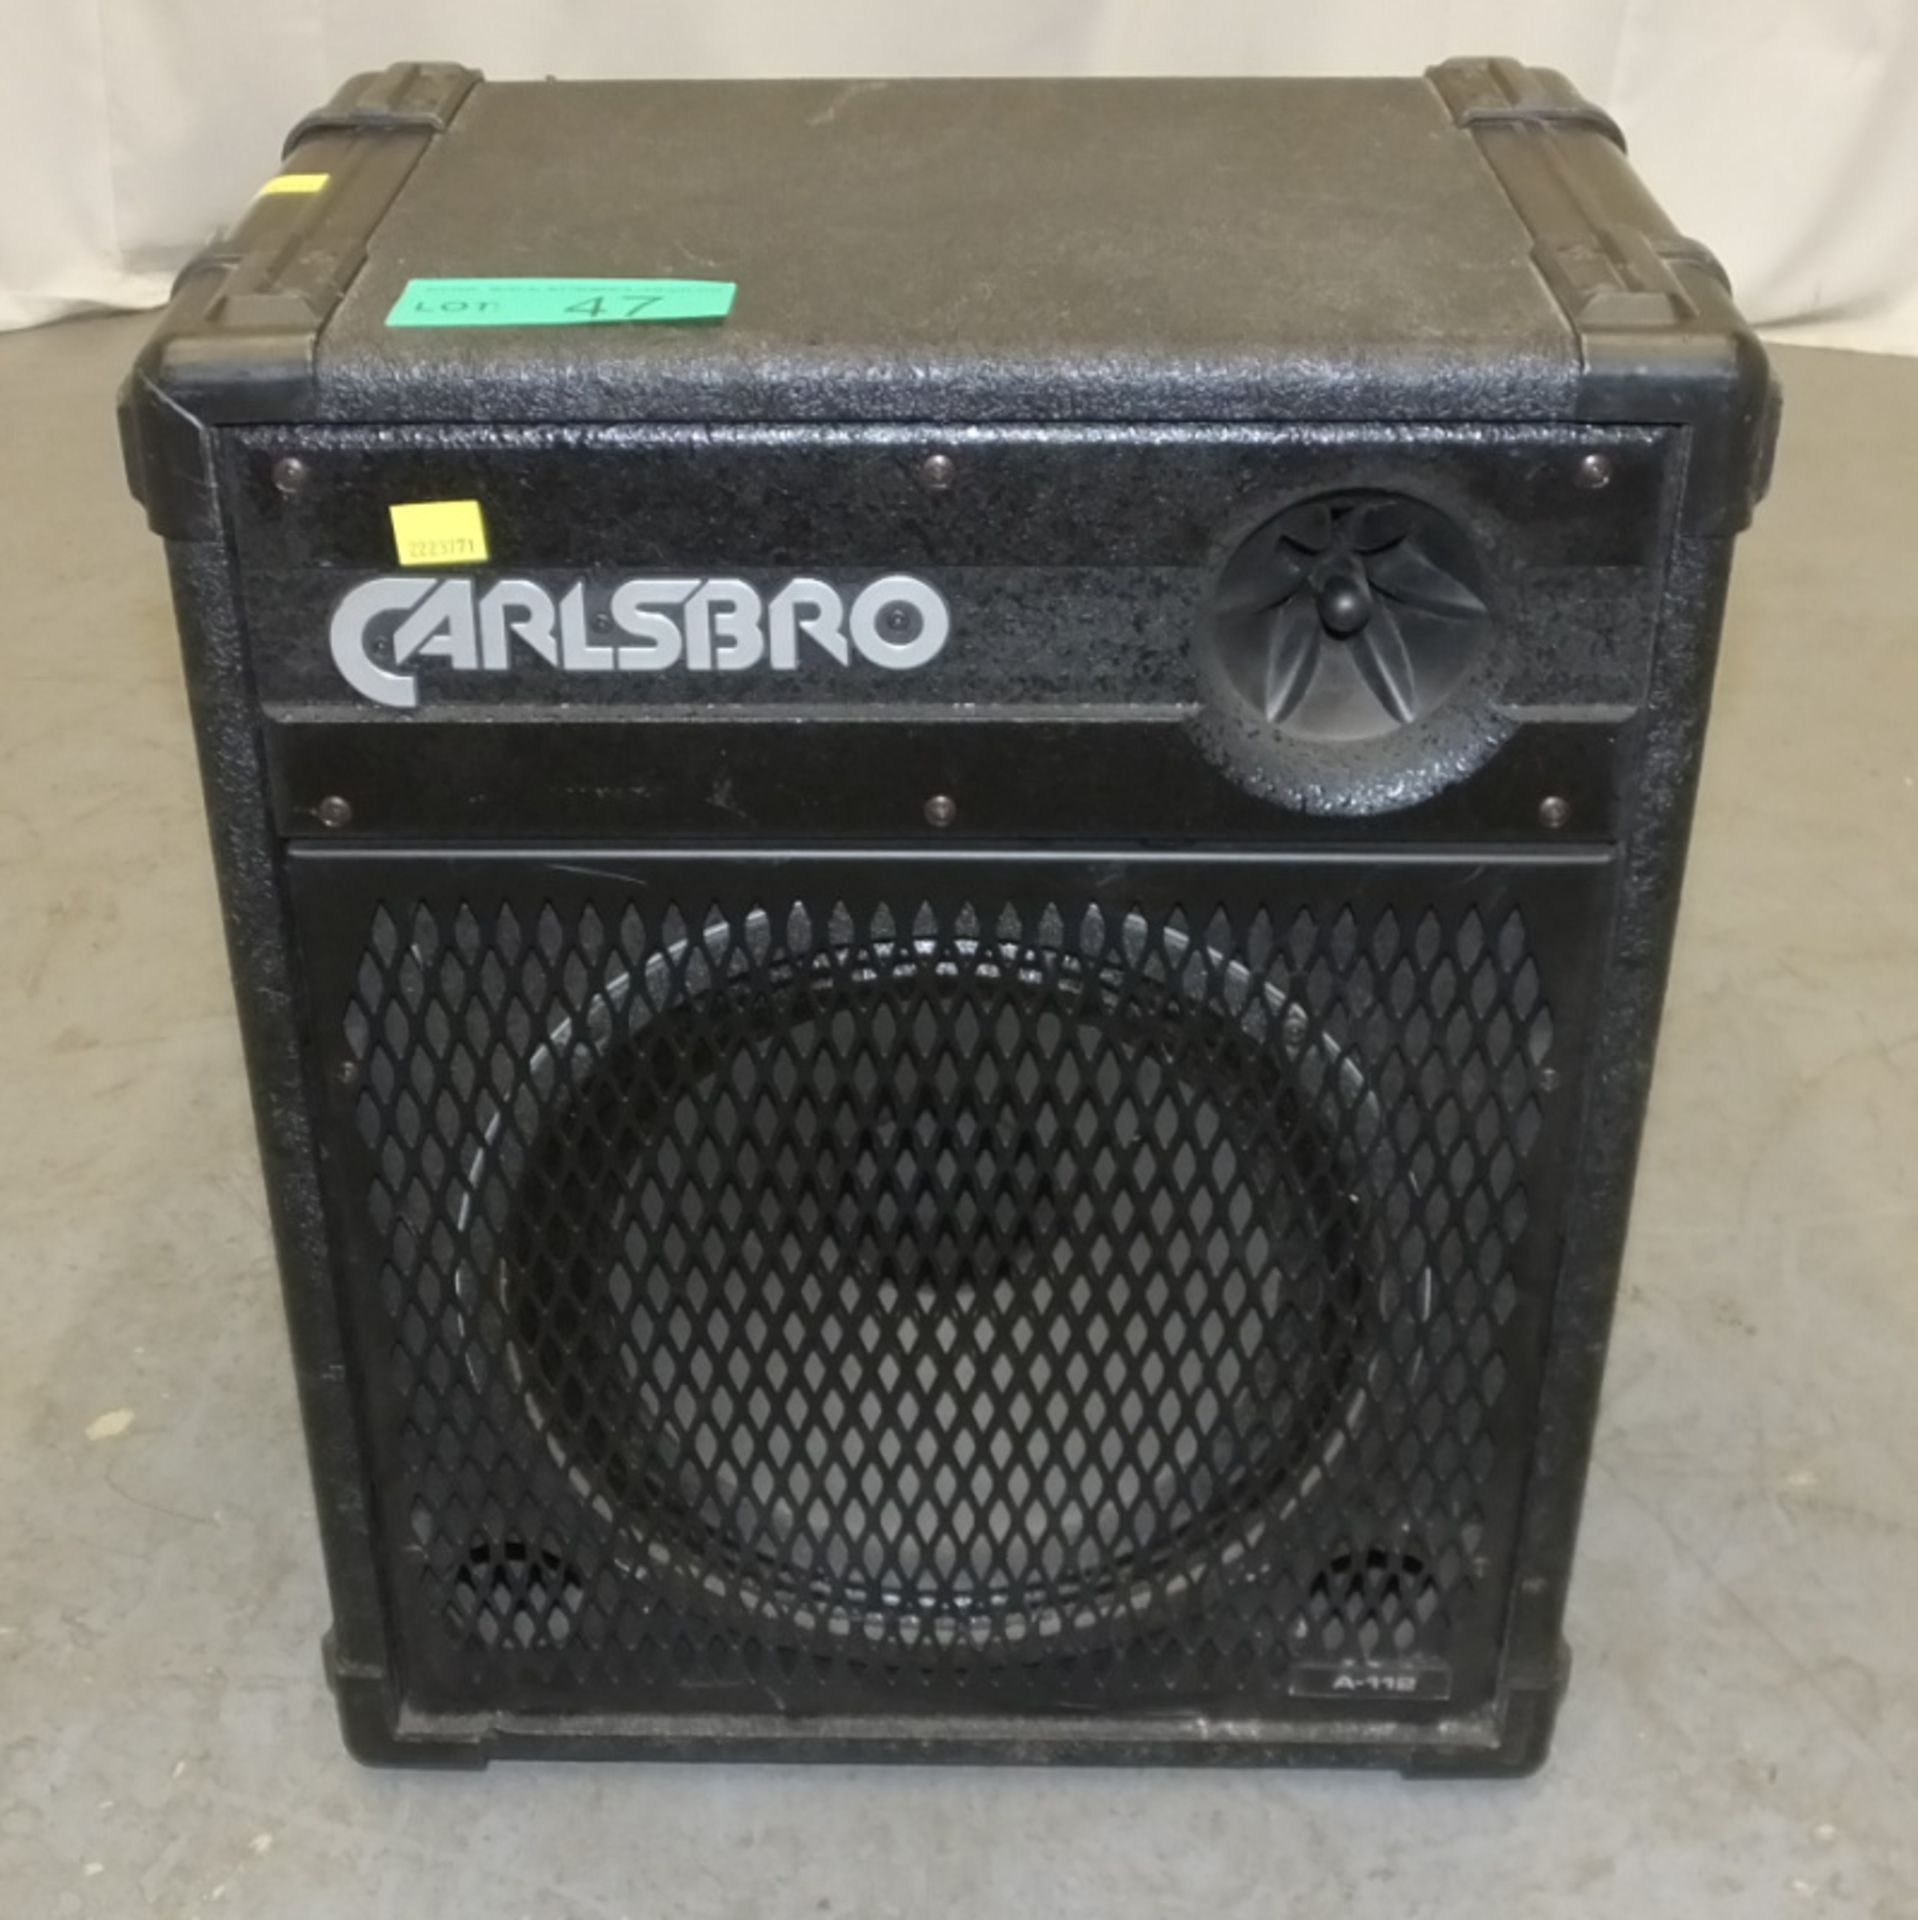 2x Carlsbro A-112 PA Speakers (one as spares or repairs) - Image 7 of 11